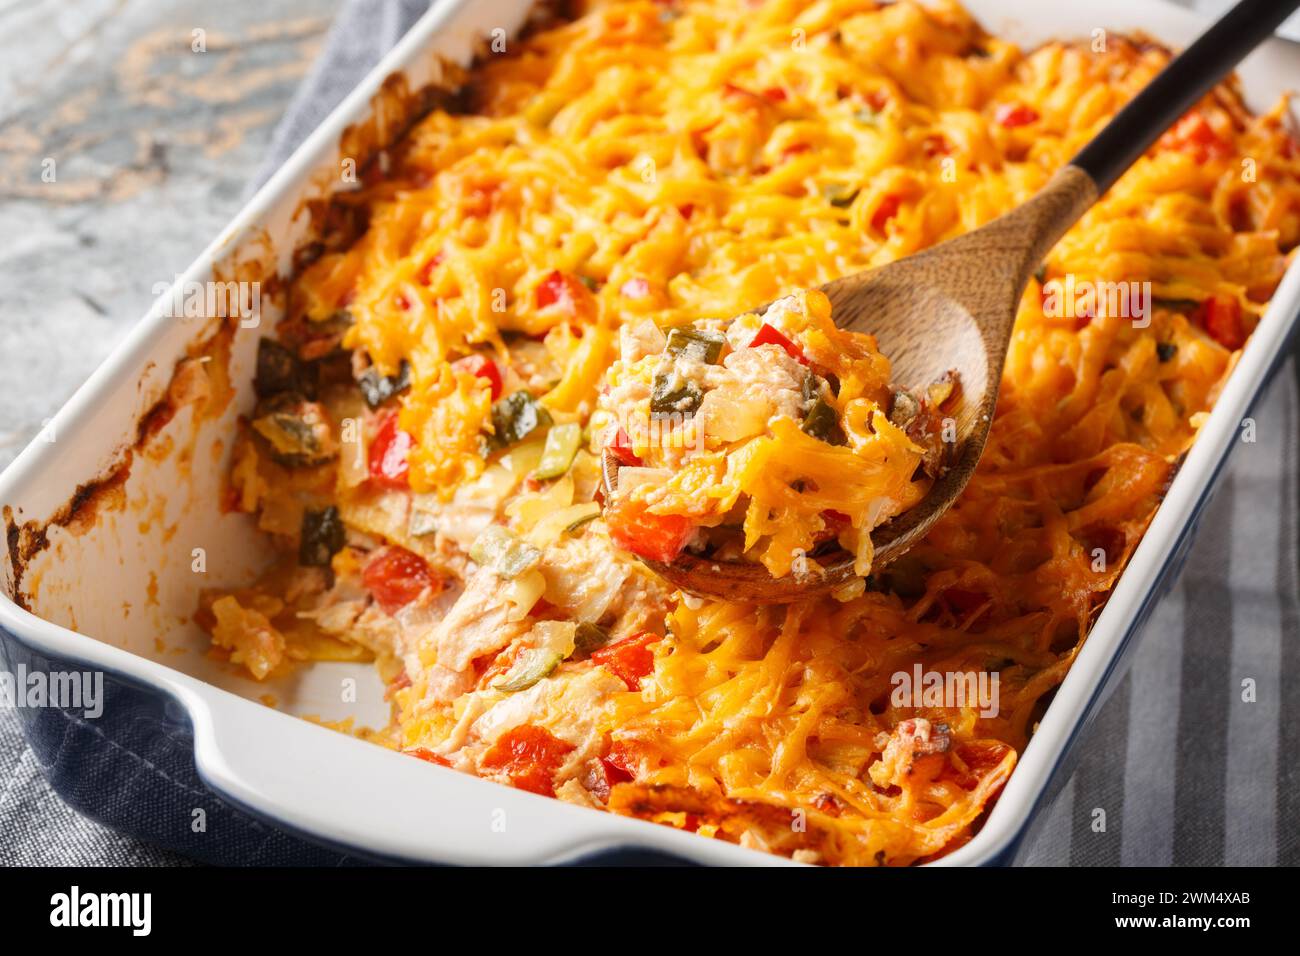 King Ranch Chicken Casserole is a Southern Texas staple dish close-up in a baking dish on a marble table. Horizontal Stock Photo